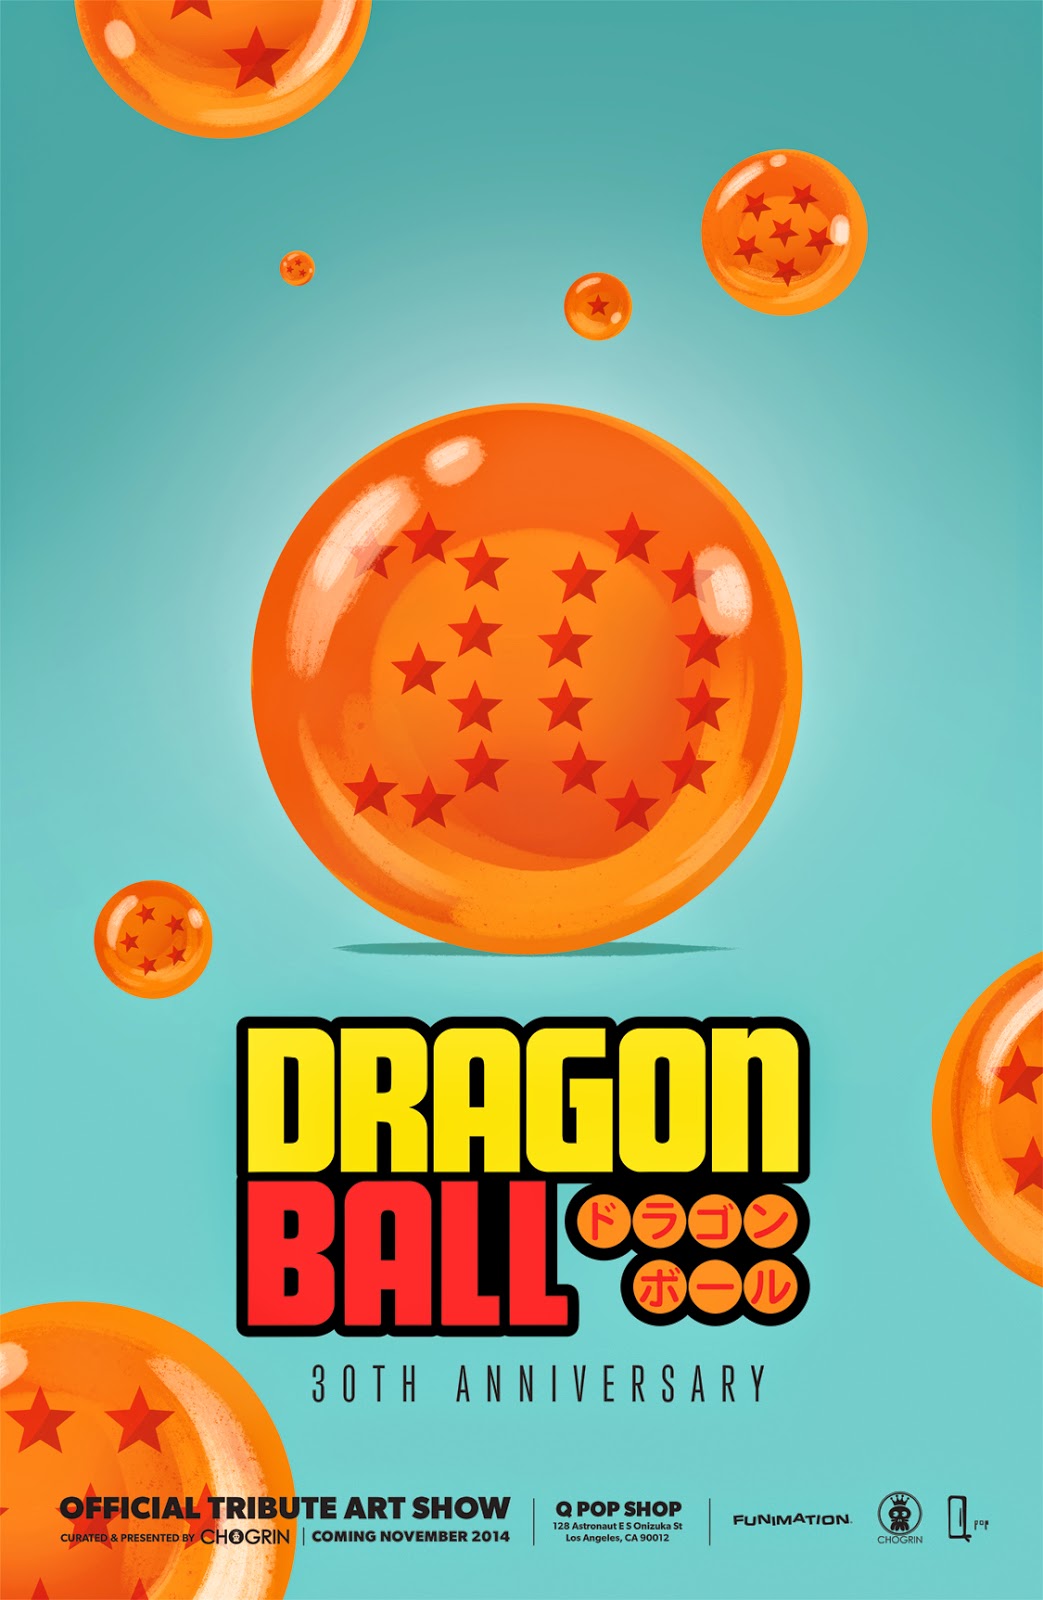 Things To Do In Los Angeles: Dragon Ball 30th Anniversary Official Tribute Art Show November 2014